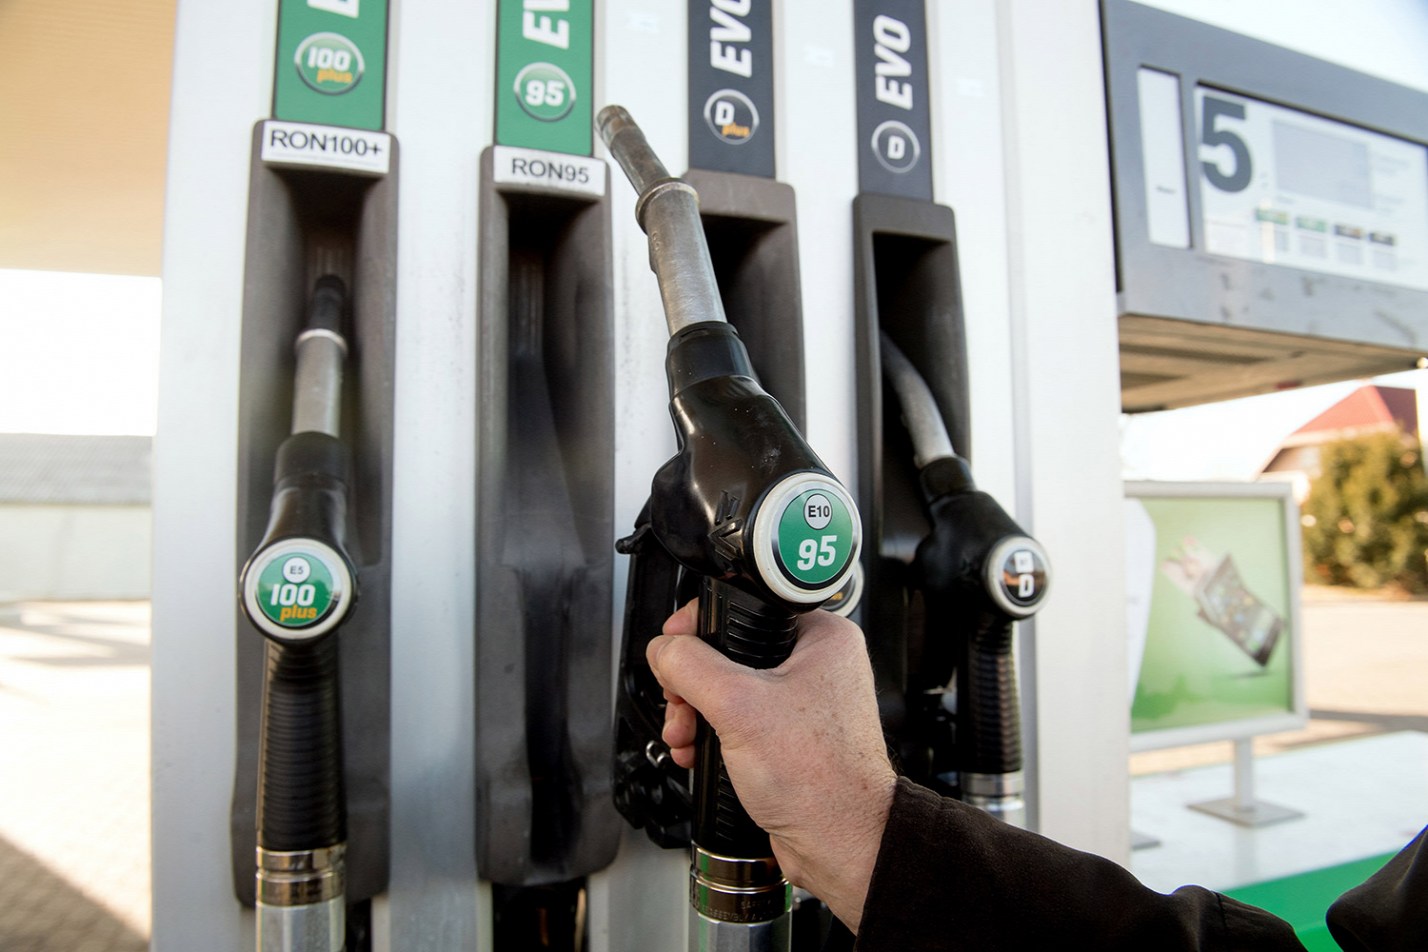 Oil Company Reps Summoned Over High Fuel Prices in Hungary